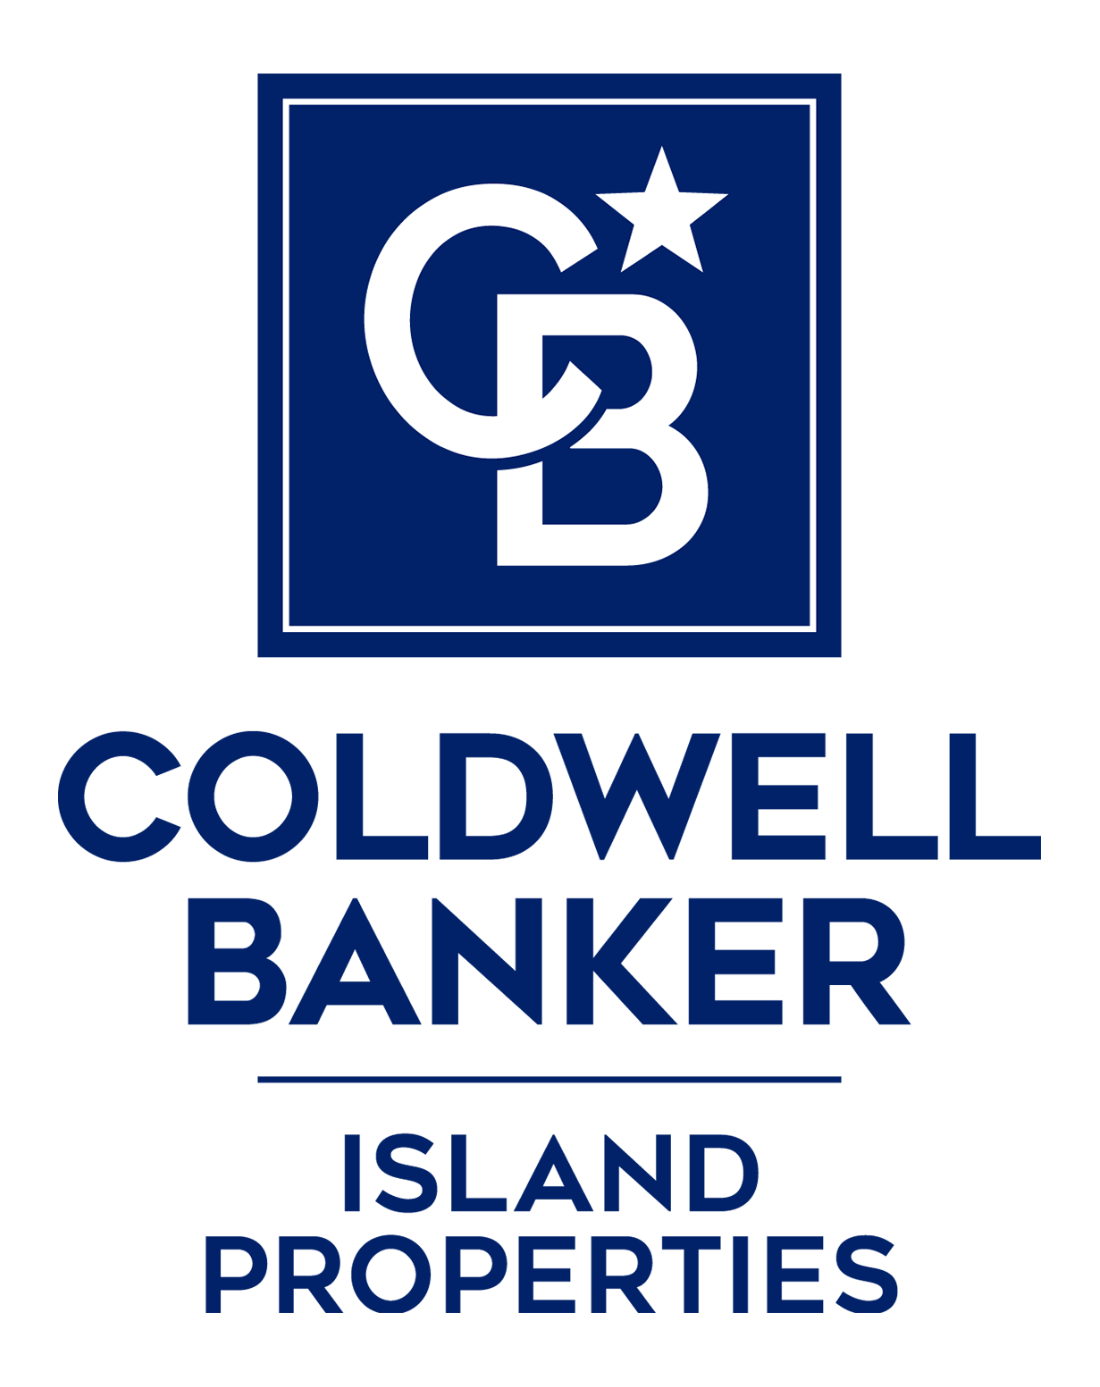 Oliver Butsch - Coldwell Banker Island Properties Logo